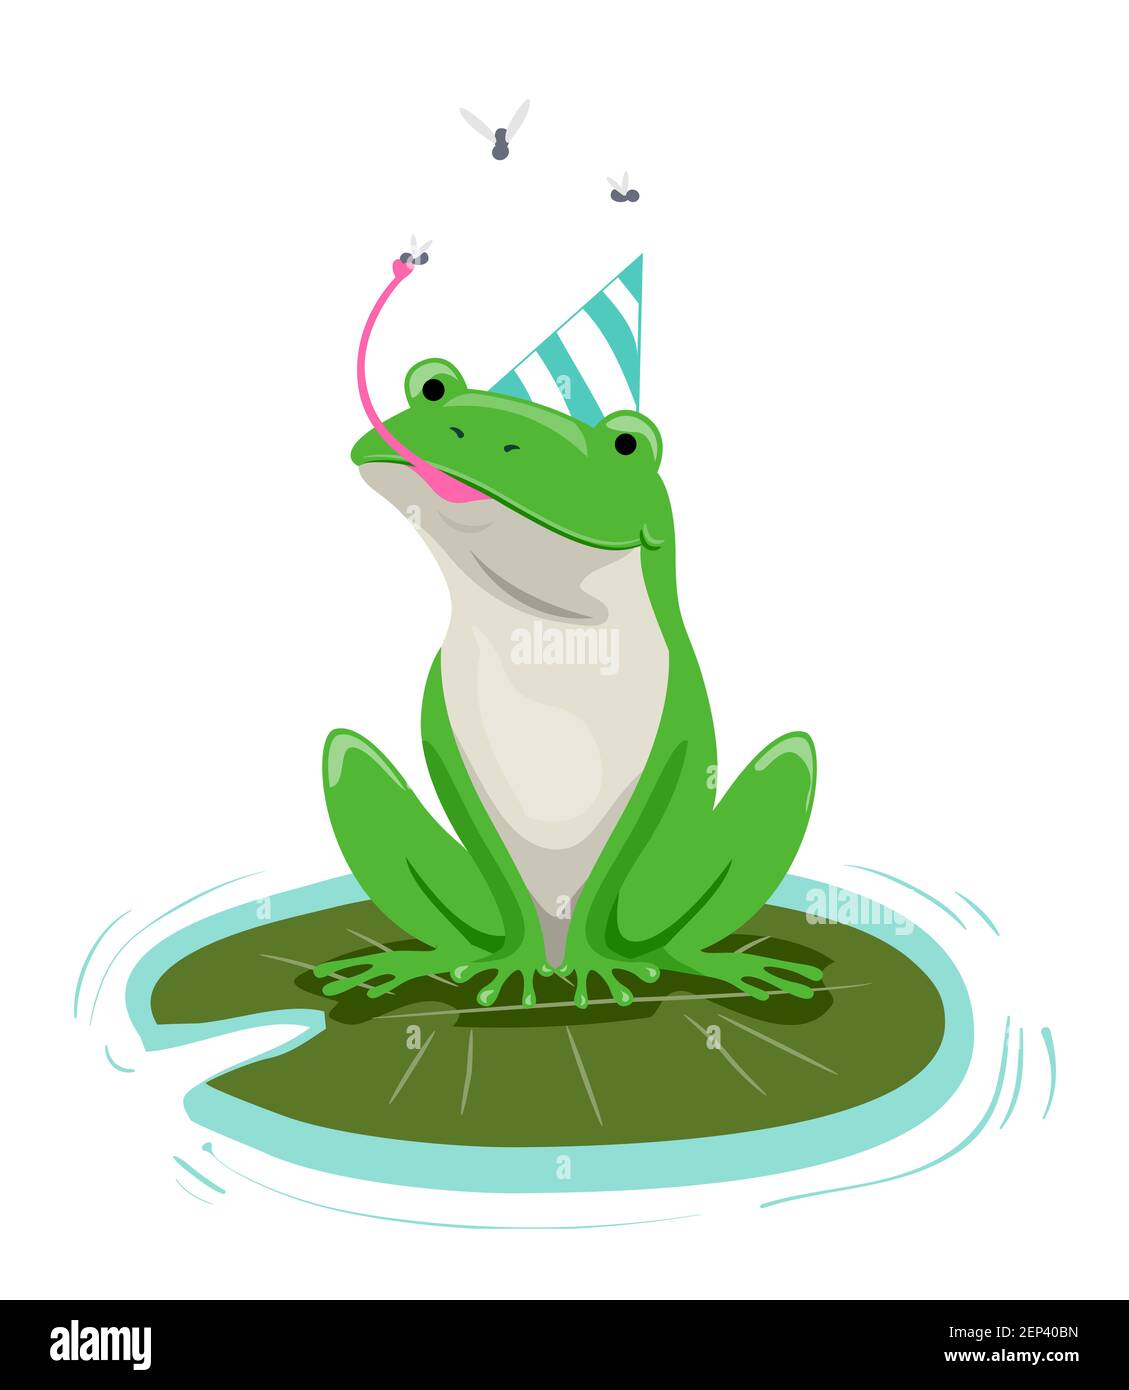 Illustration of a Frog Sitting on a Lily Pad, Catching Insect and Wearing a Birthday Hat Stock Photo